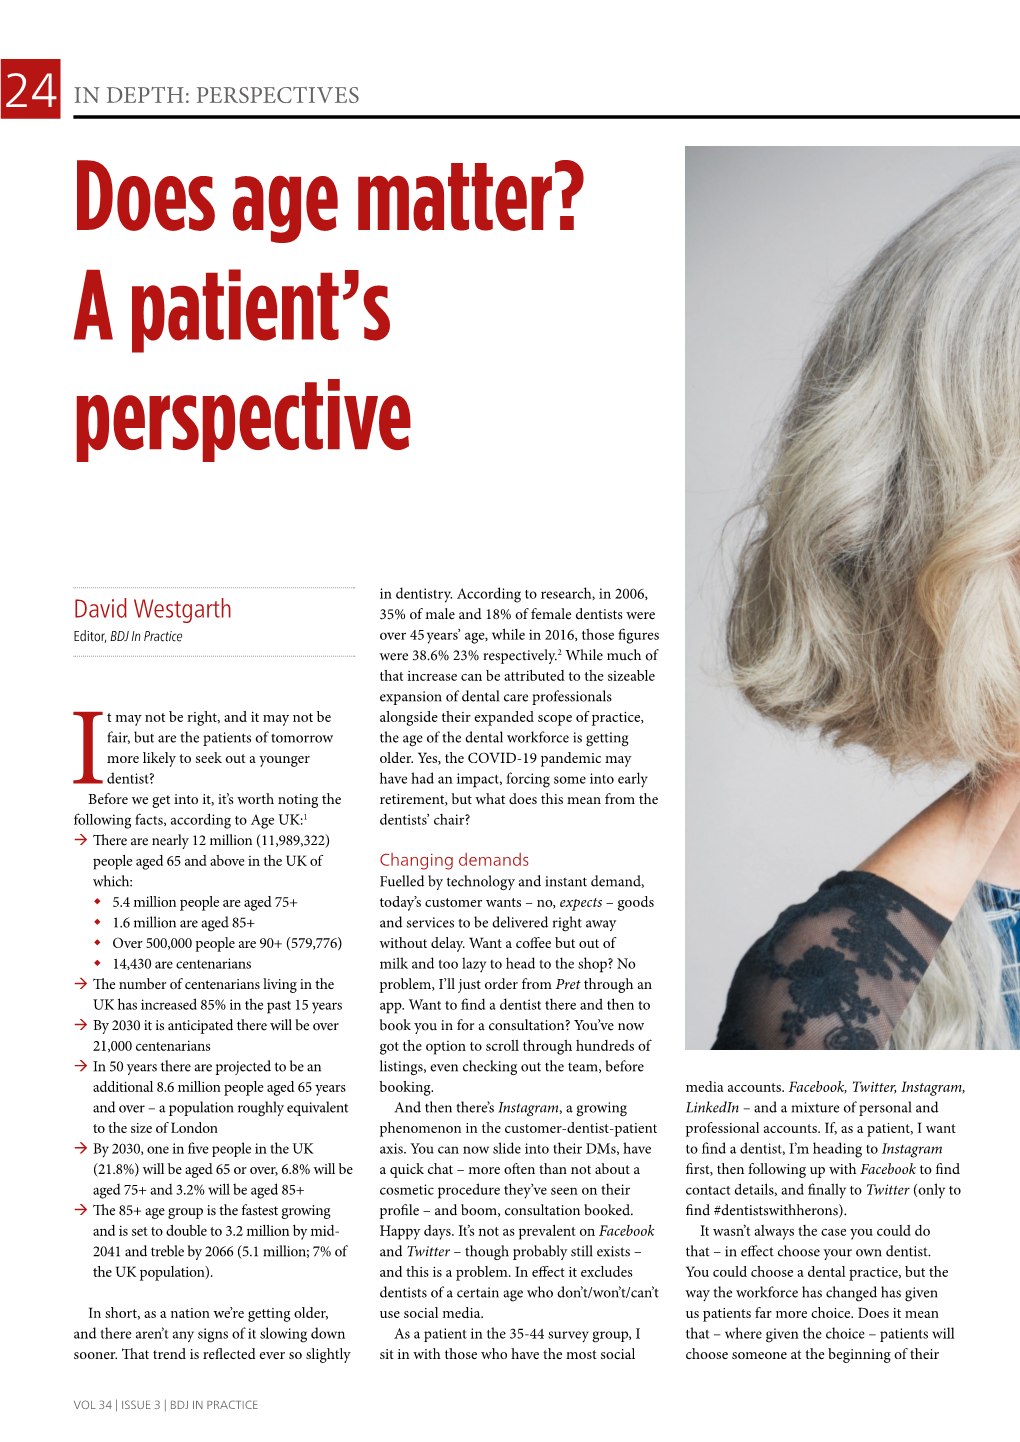 Does Age Matter? a Patient's Perspective